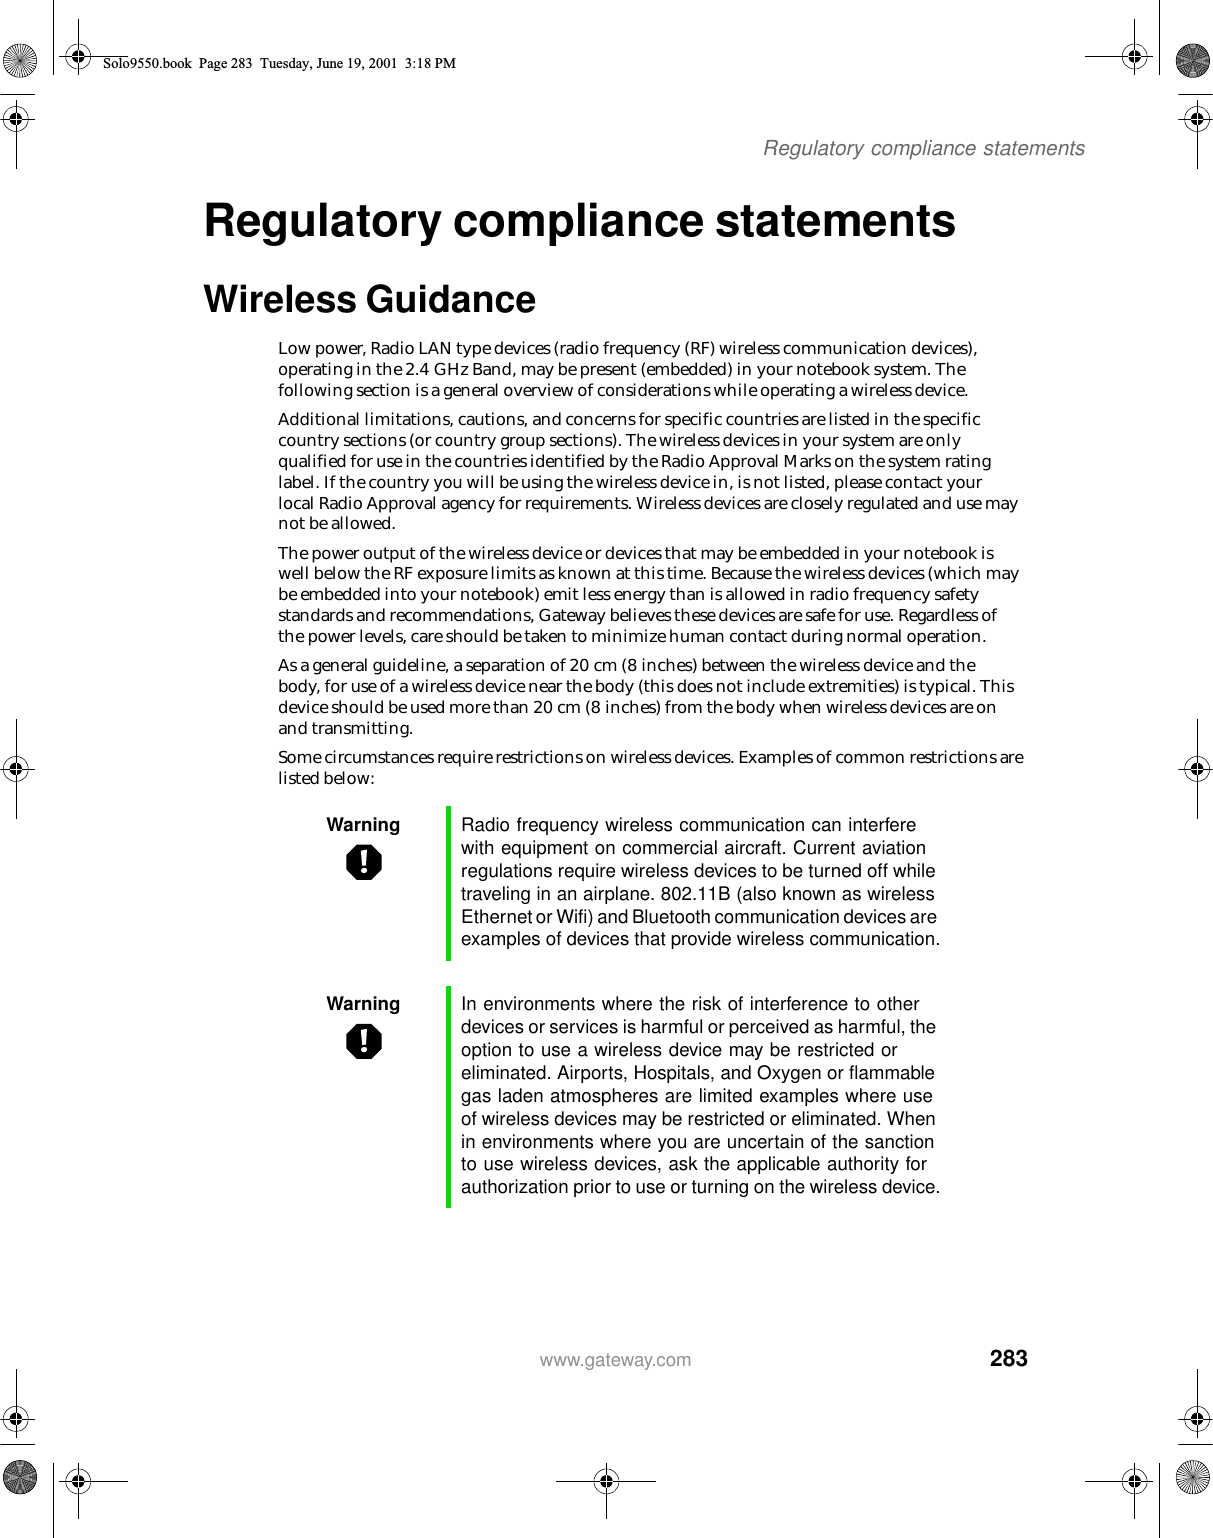 283Regulatory compliance statementswww.gateway.comRegulatory compliance statementsWireless GuidanceLow power, Radio LAN type devices (radio frequency (RF) wireless communication devices), operating in the 2.4 GHz Band, may be present (embedded) in your notebook system. The following section is a general overview of considerations while operating a wireless device.Additional limitations, cautions, and concerns for specific countries are listed in the specific country sections (or country group sections). The wireless devices in your system are only qualified for use in the countries identified by the Radio Approval Marks on the system rating label. If the country you will be using the wireless device in, is not listed, please contact your local Radio Approval agency for requirements. Wireless devices are closely regulated and use may not be allowed.The power output of the wireless device or devices that may be embedded in your notebook is well below the RF exposure limits as known at this time. Because the wireless devices (which may be embedded into your notebook) emit less energy than is allowed in radio frequency safety standards and recommendations, Gateway believes these devices are safe for use. Regardless of the power levels, care should be taken to minimize human contact during normal operation.As a general guideline, a separation of 20 cm (8 inches) between the wireless device and the body, for use of a wireless device near the body (this does not include extremities) is typical. This device should be used more than 20 cm (8 inches) from the body when wireless devices are on and transmitting.Some circumstances require restrictions on wireless devices. Examples of common restrictions are listed below:Warning Radio frequency wireless communication can interfere with equipment on commercial aircraft. Current aviation regulations require wireless devices to be turned off while traveling in an airplane. 802.11B (also known as wireless Ethernet or Wifi) and Bluetooth communication devices are examples of devices that provide wireless communication.Warning In environments where the risk of interference to other devices or services is harmful or perceived as harmful, the option to use a wireless device may be restricted or eliminated. Airports, Hospitals, and Oxygen or flammable gas laden atmospheres are limited examples where use of wireless devices may be restricted or eliminated. When in environments where you are uncertain of the sanction to use wireless devices, ask the applicable authority for authorization prior to use or turning on the wireless device.Solo9550.book Page 283 Tuesday, June 19, 2001 3:18 PM